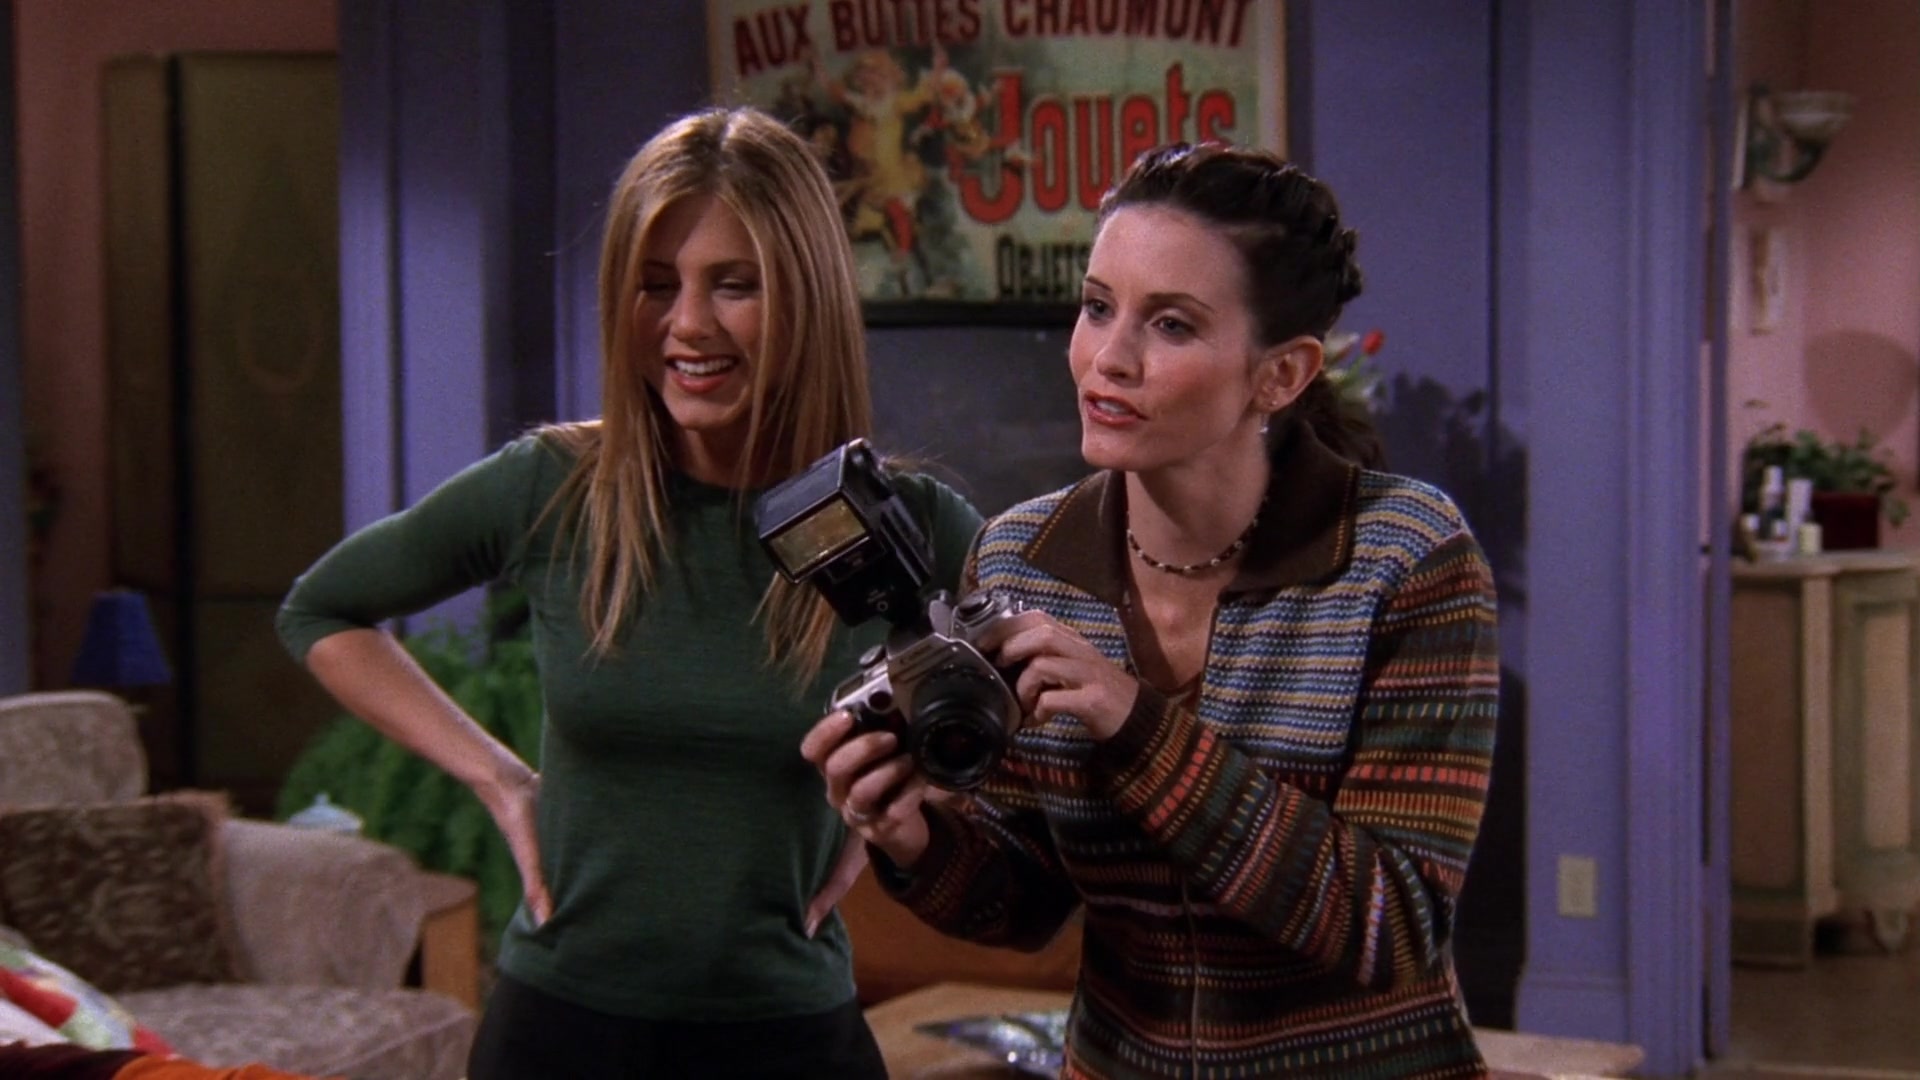 Canon Camera Used By Courteney Cox (Monica Geller) In Friends Season 5 Episode 11 "The One With All The Resolutions" (1999)